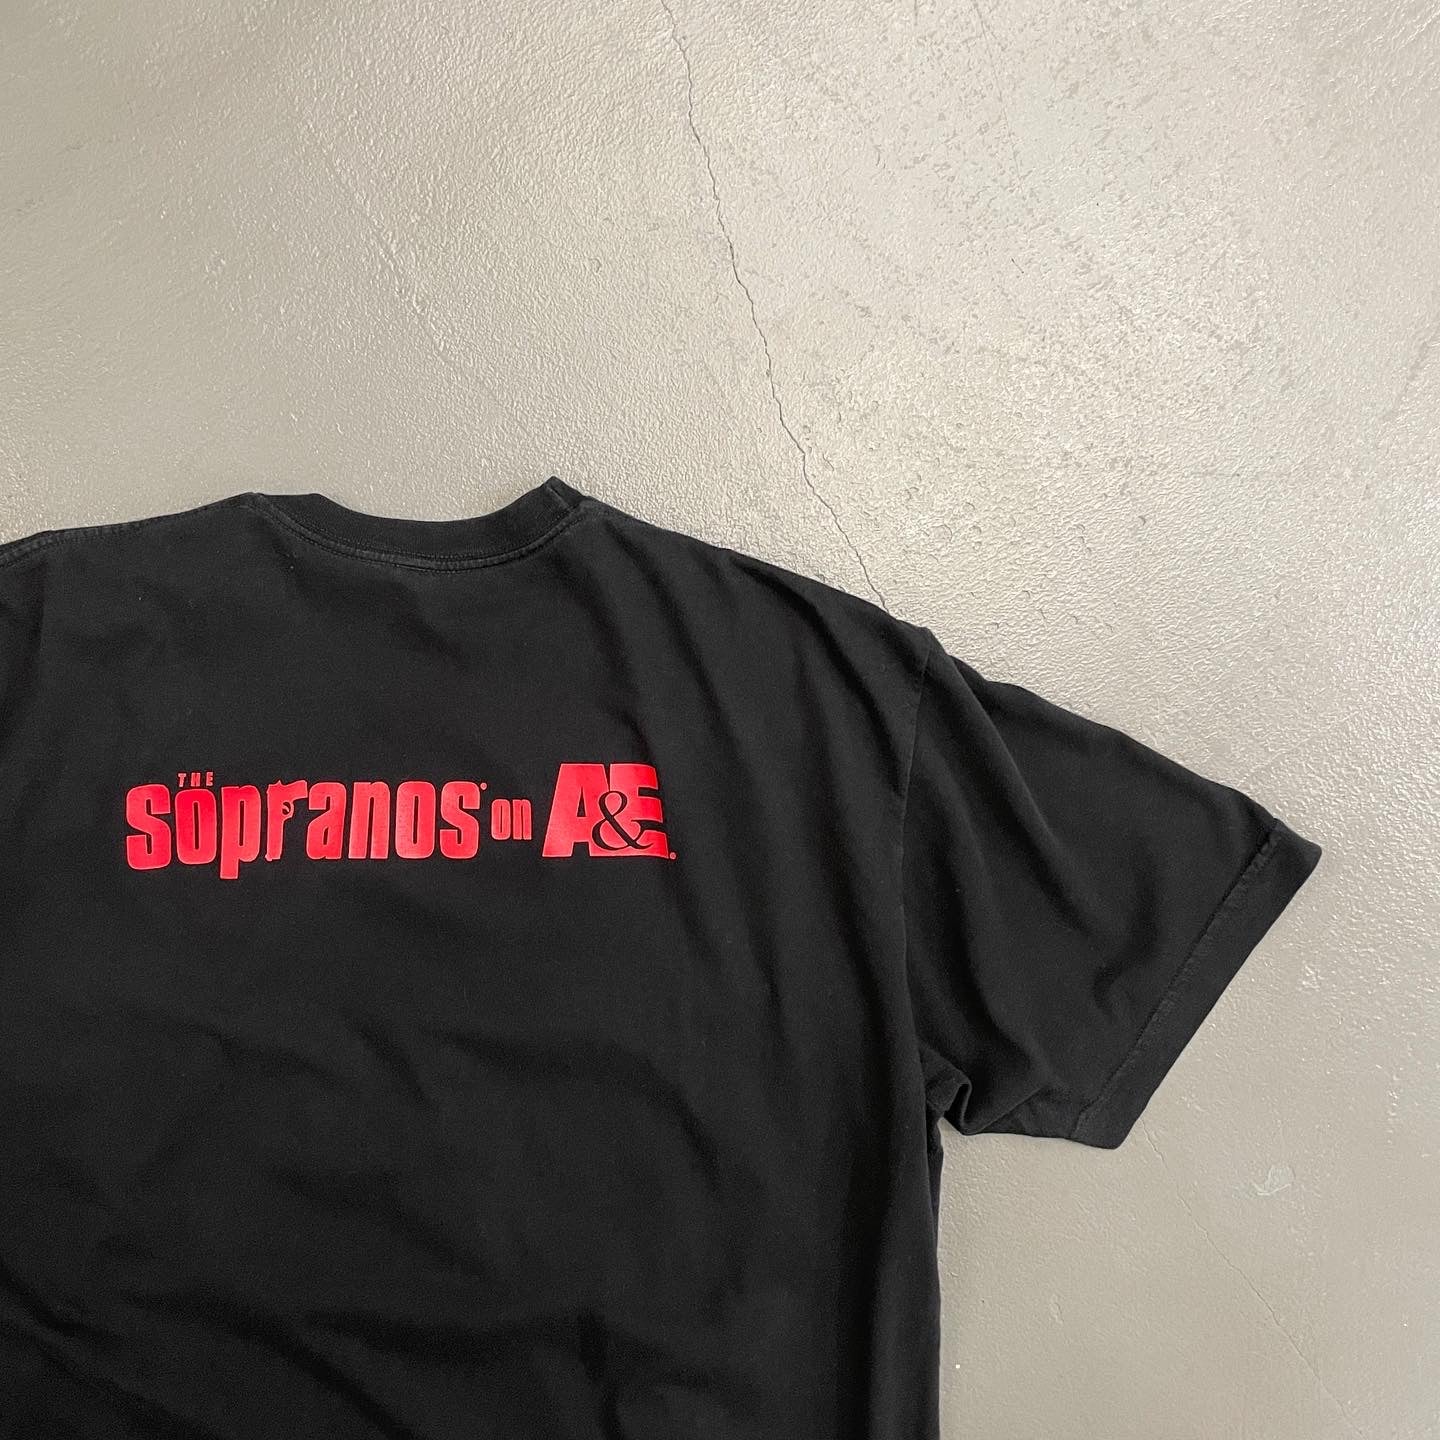 The Sopranos on A&E Promotion S/S Tee